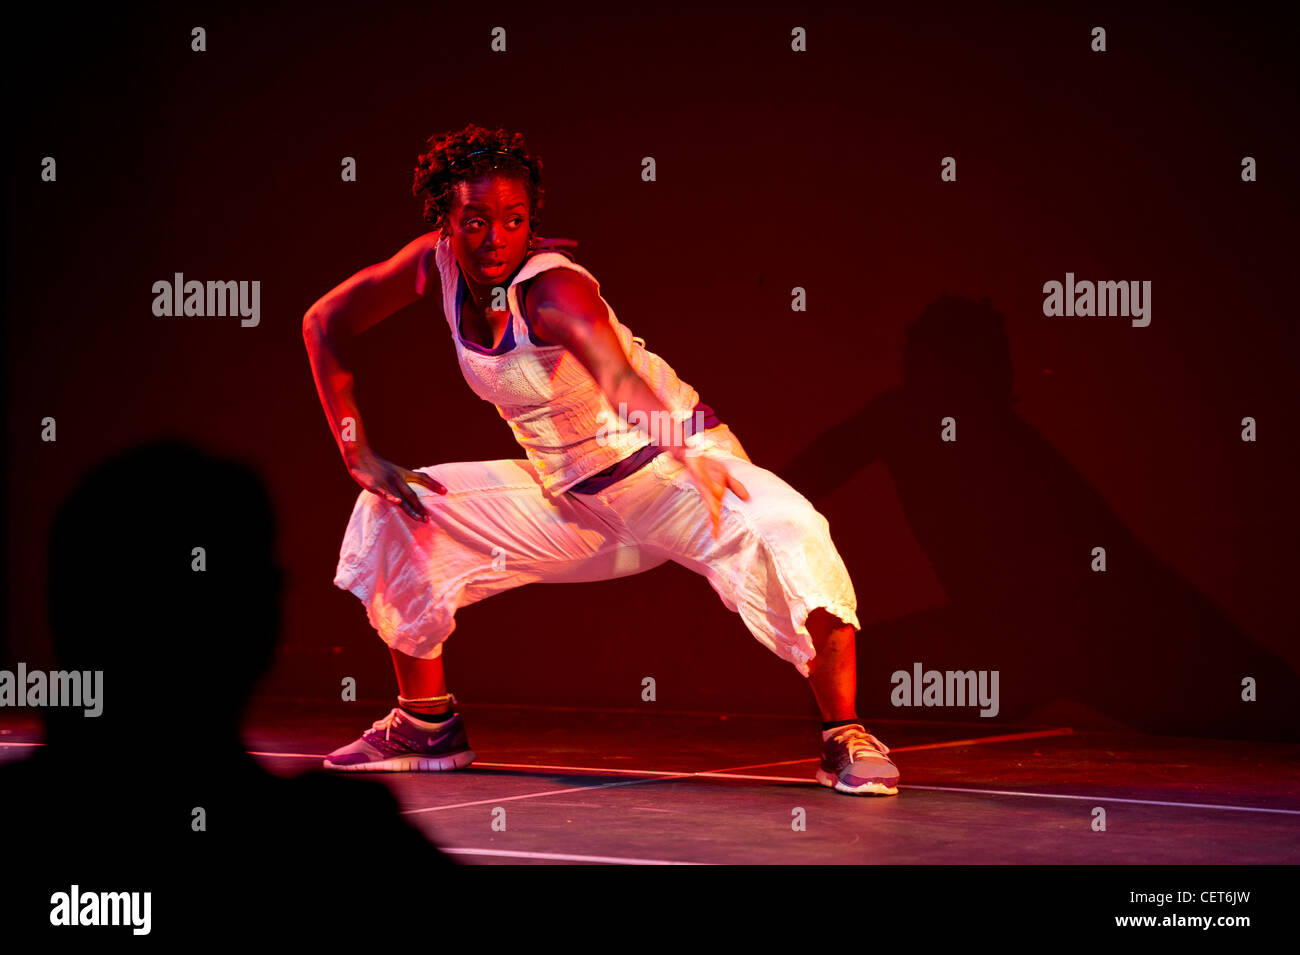 Girl performing interpretive hip hop dance on stage Stock Photo